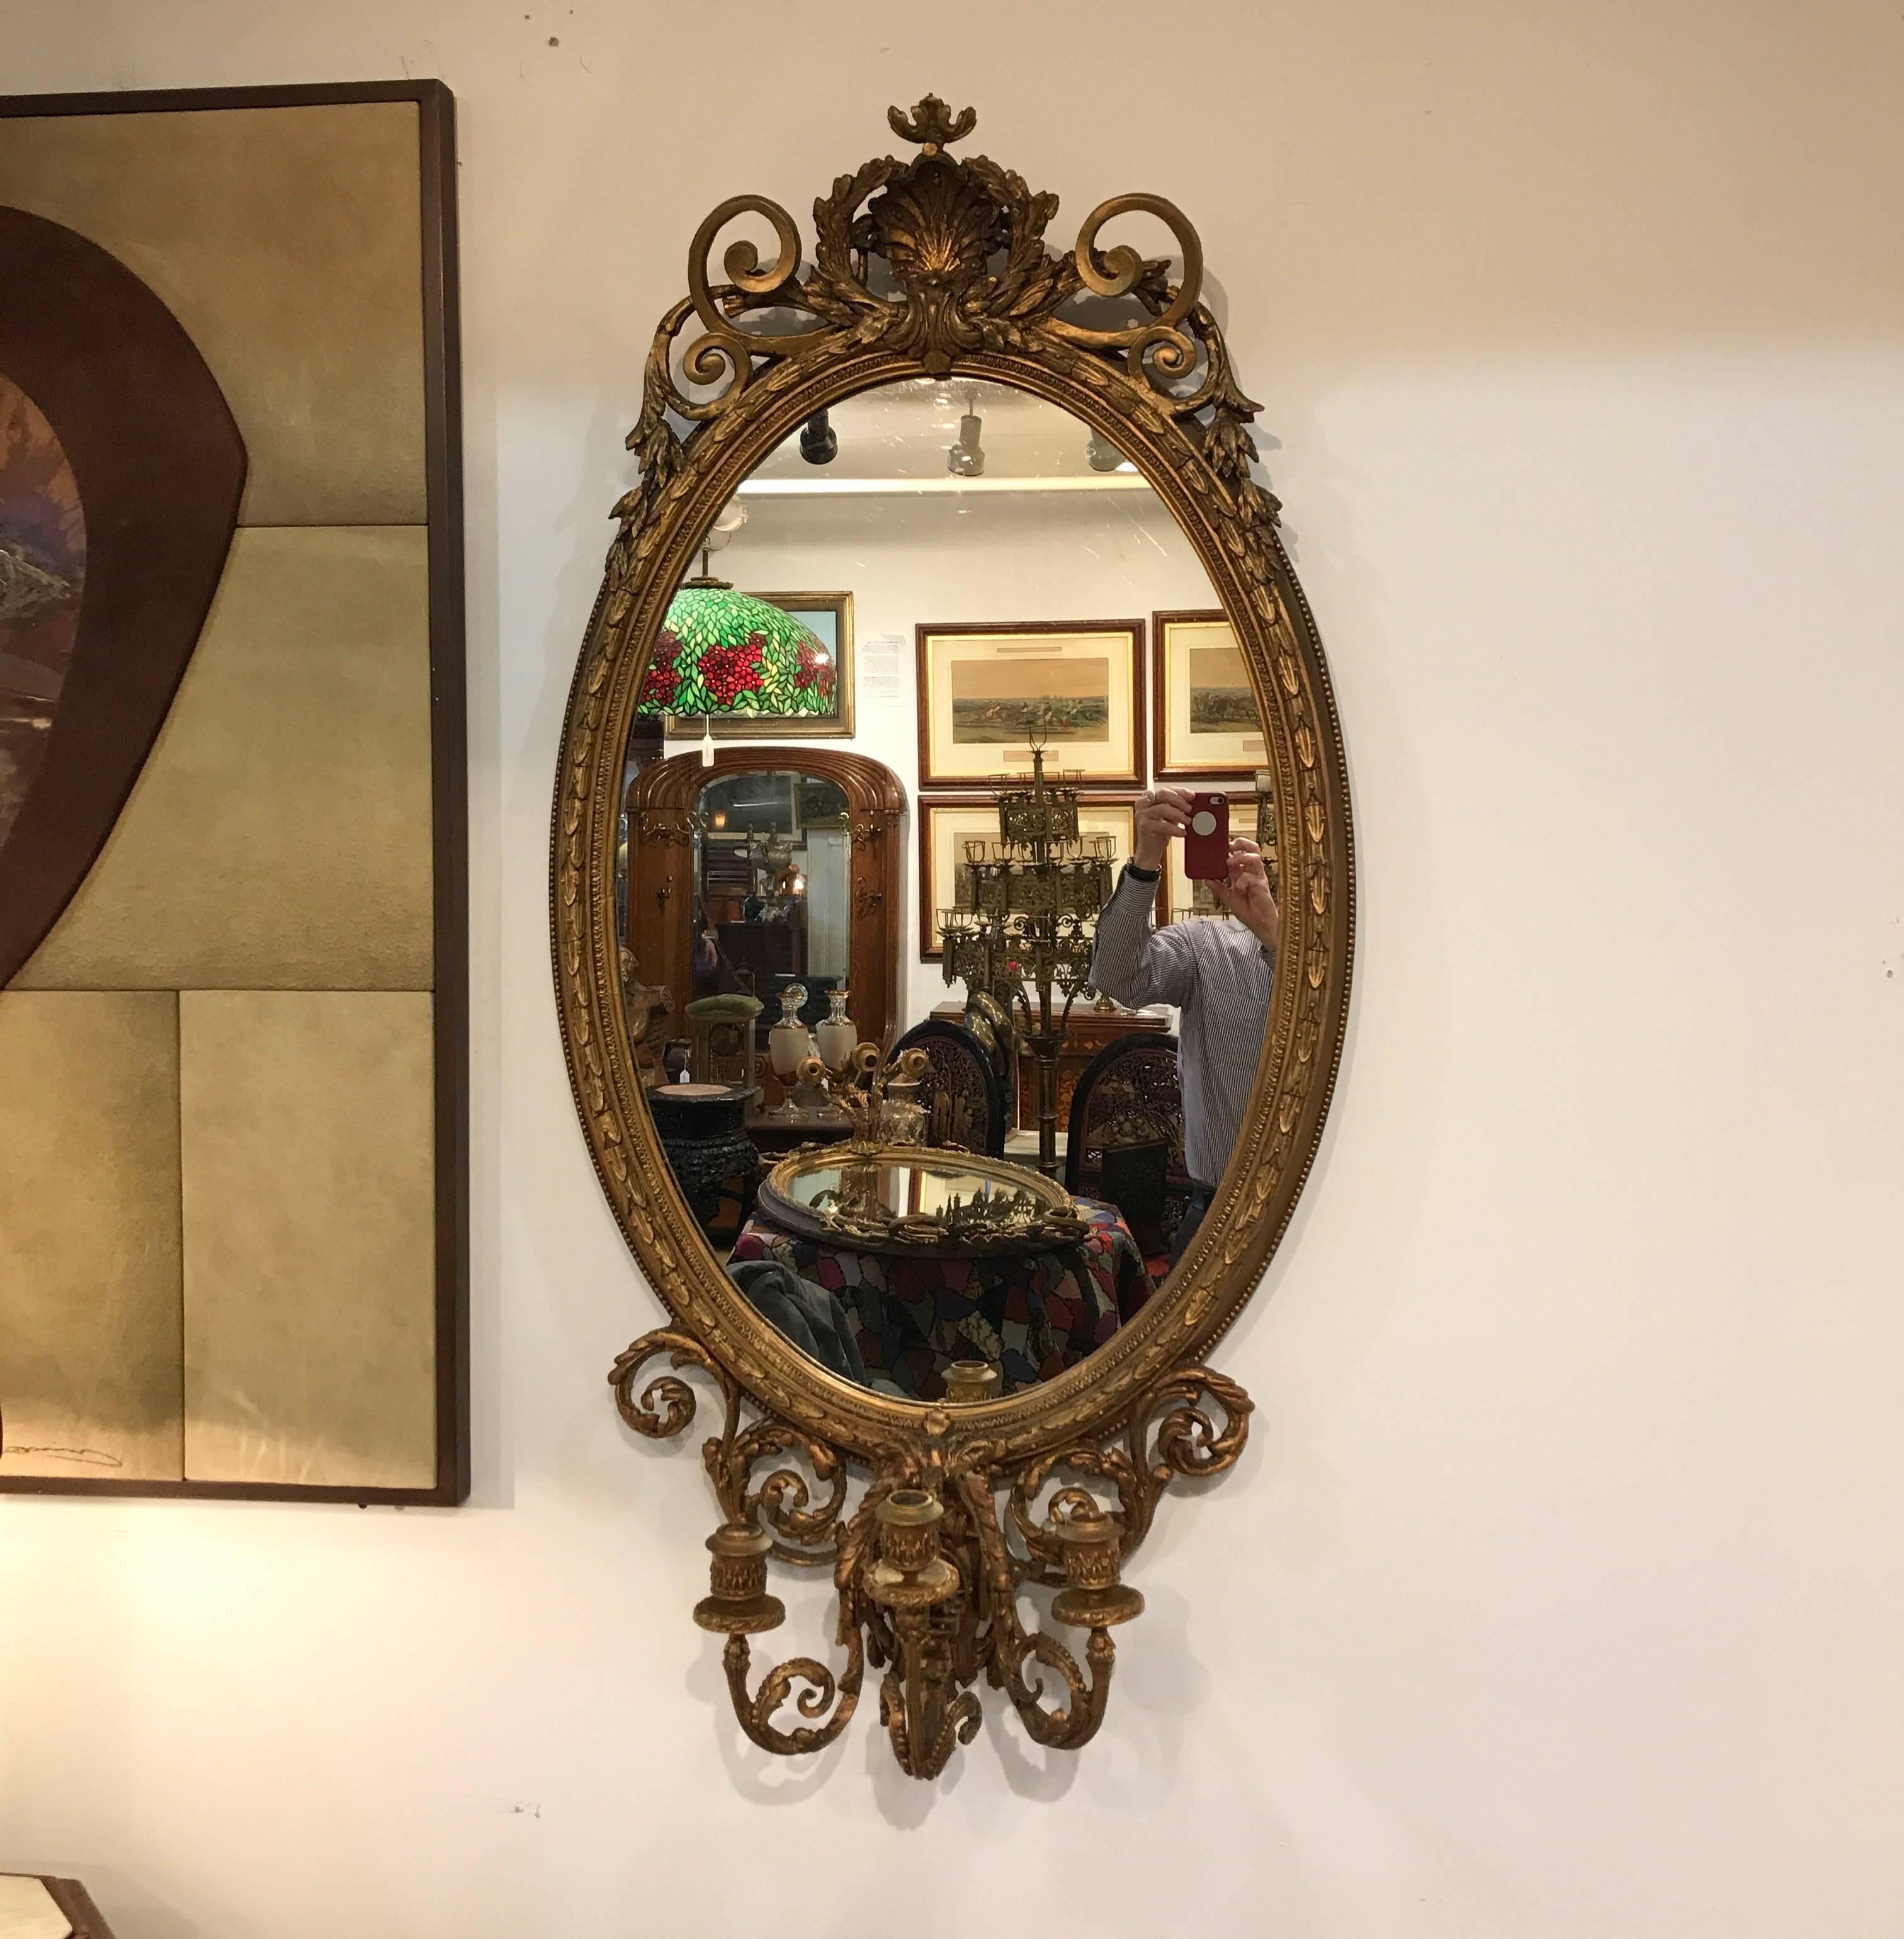 Large pair of oval mirrors with candelabra fronts. The pair with detailed tops and bottoms with beaded detail along the sides. The bottoms with three arms for candles. A rare 19th century pair. Some fade to silvering on one mirror.